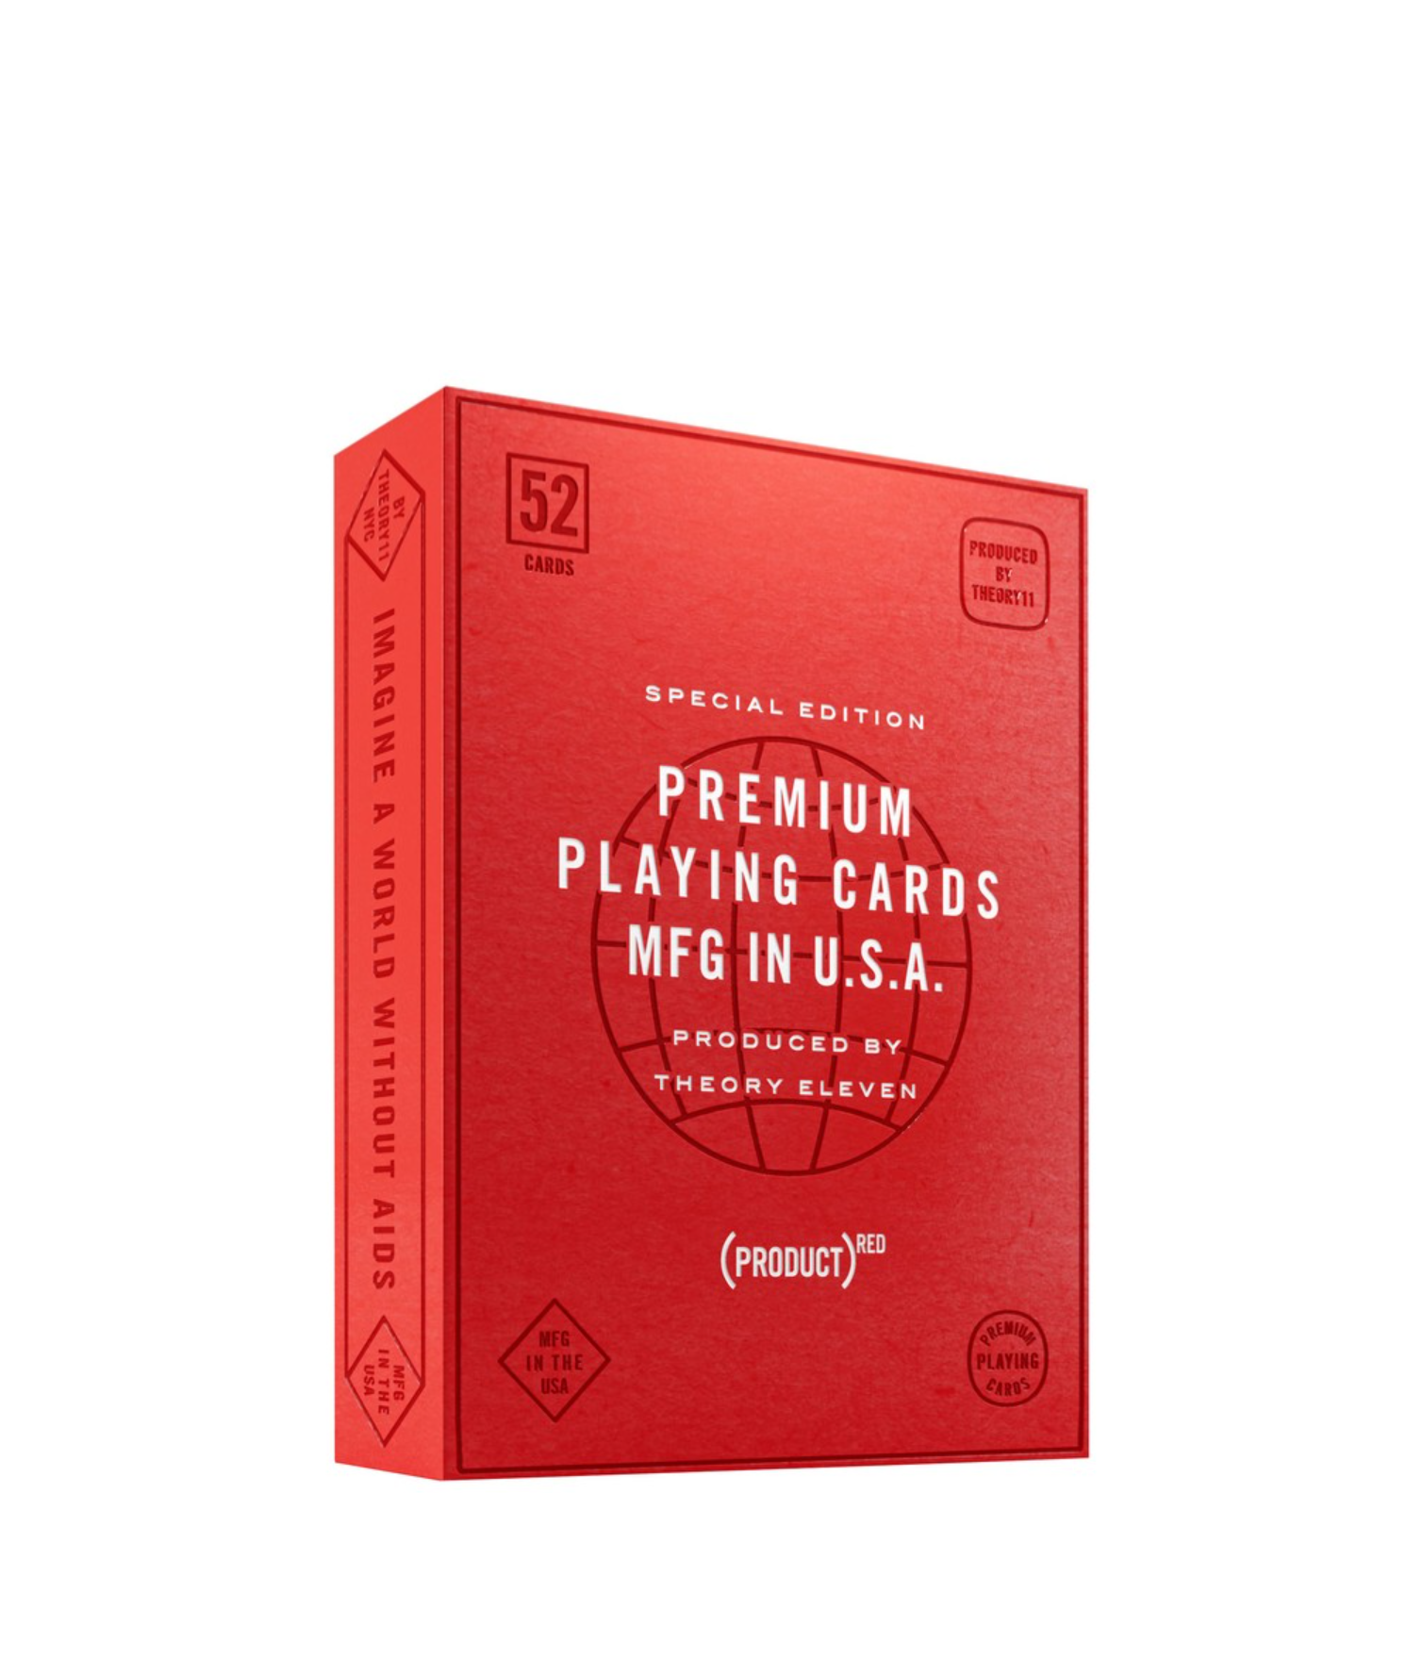 (Product) Red Playing Cards by Theory 11